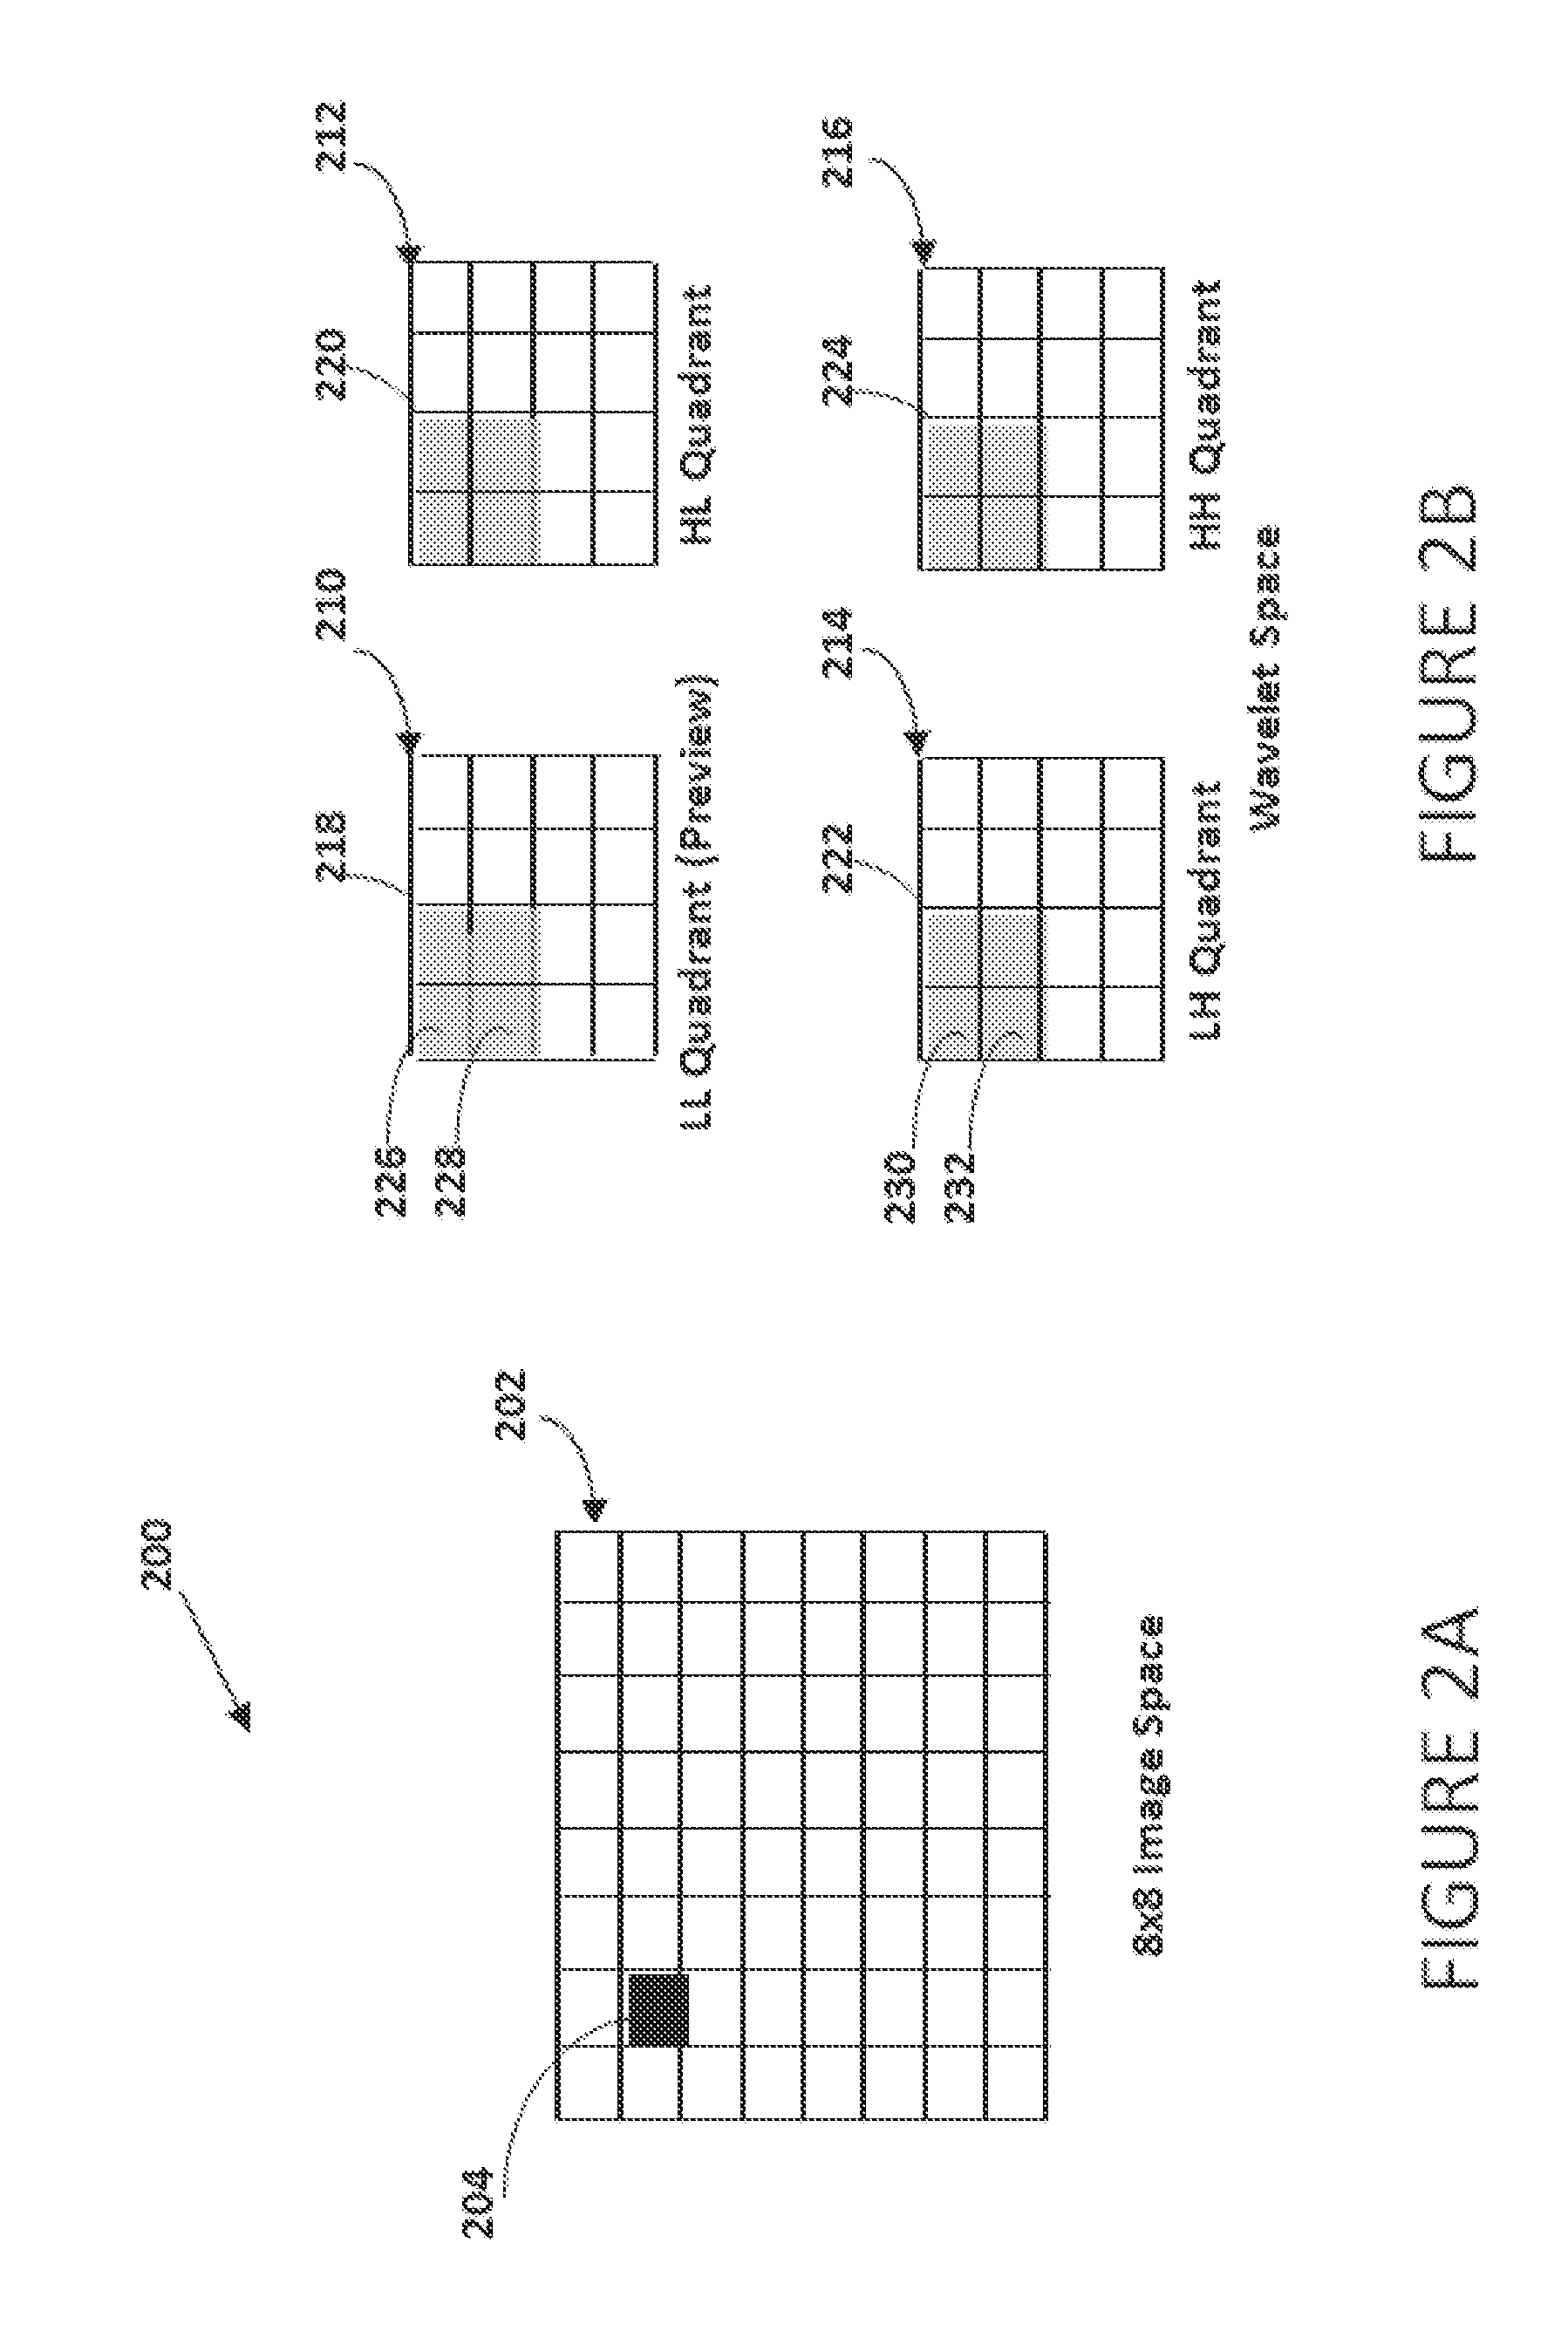 Systems and methods for wavelet and channel-based high definition video encoding